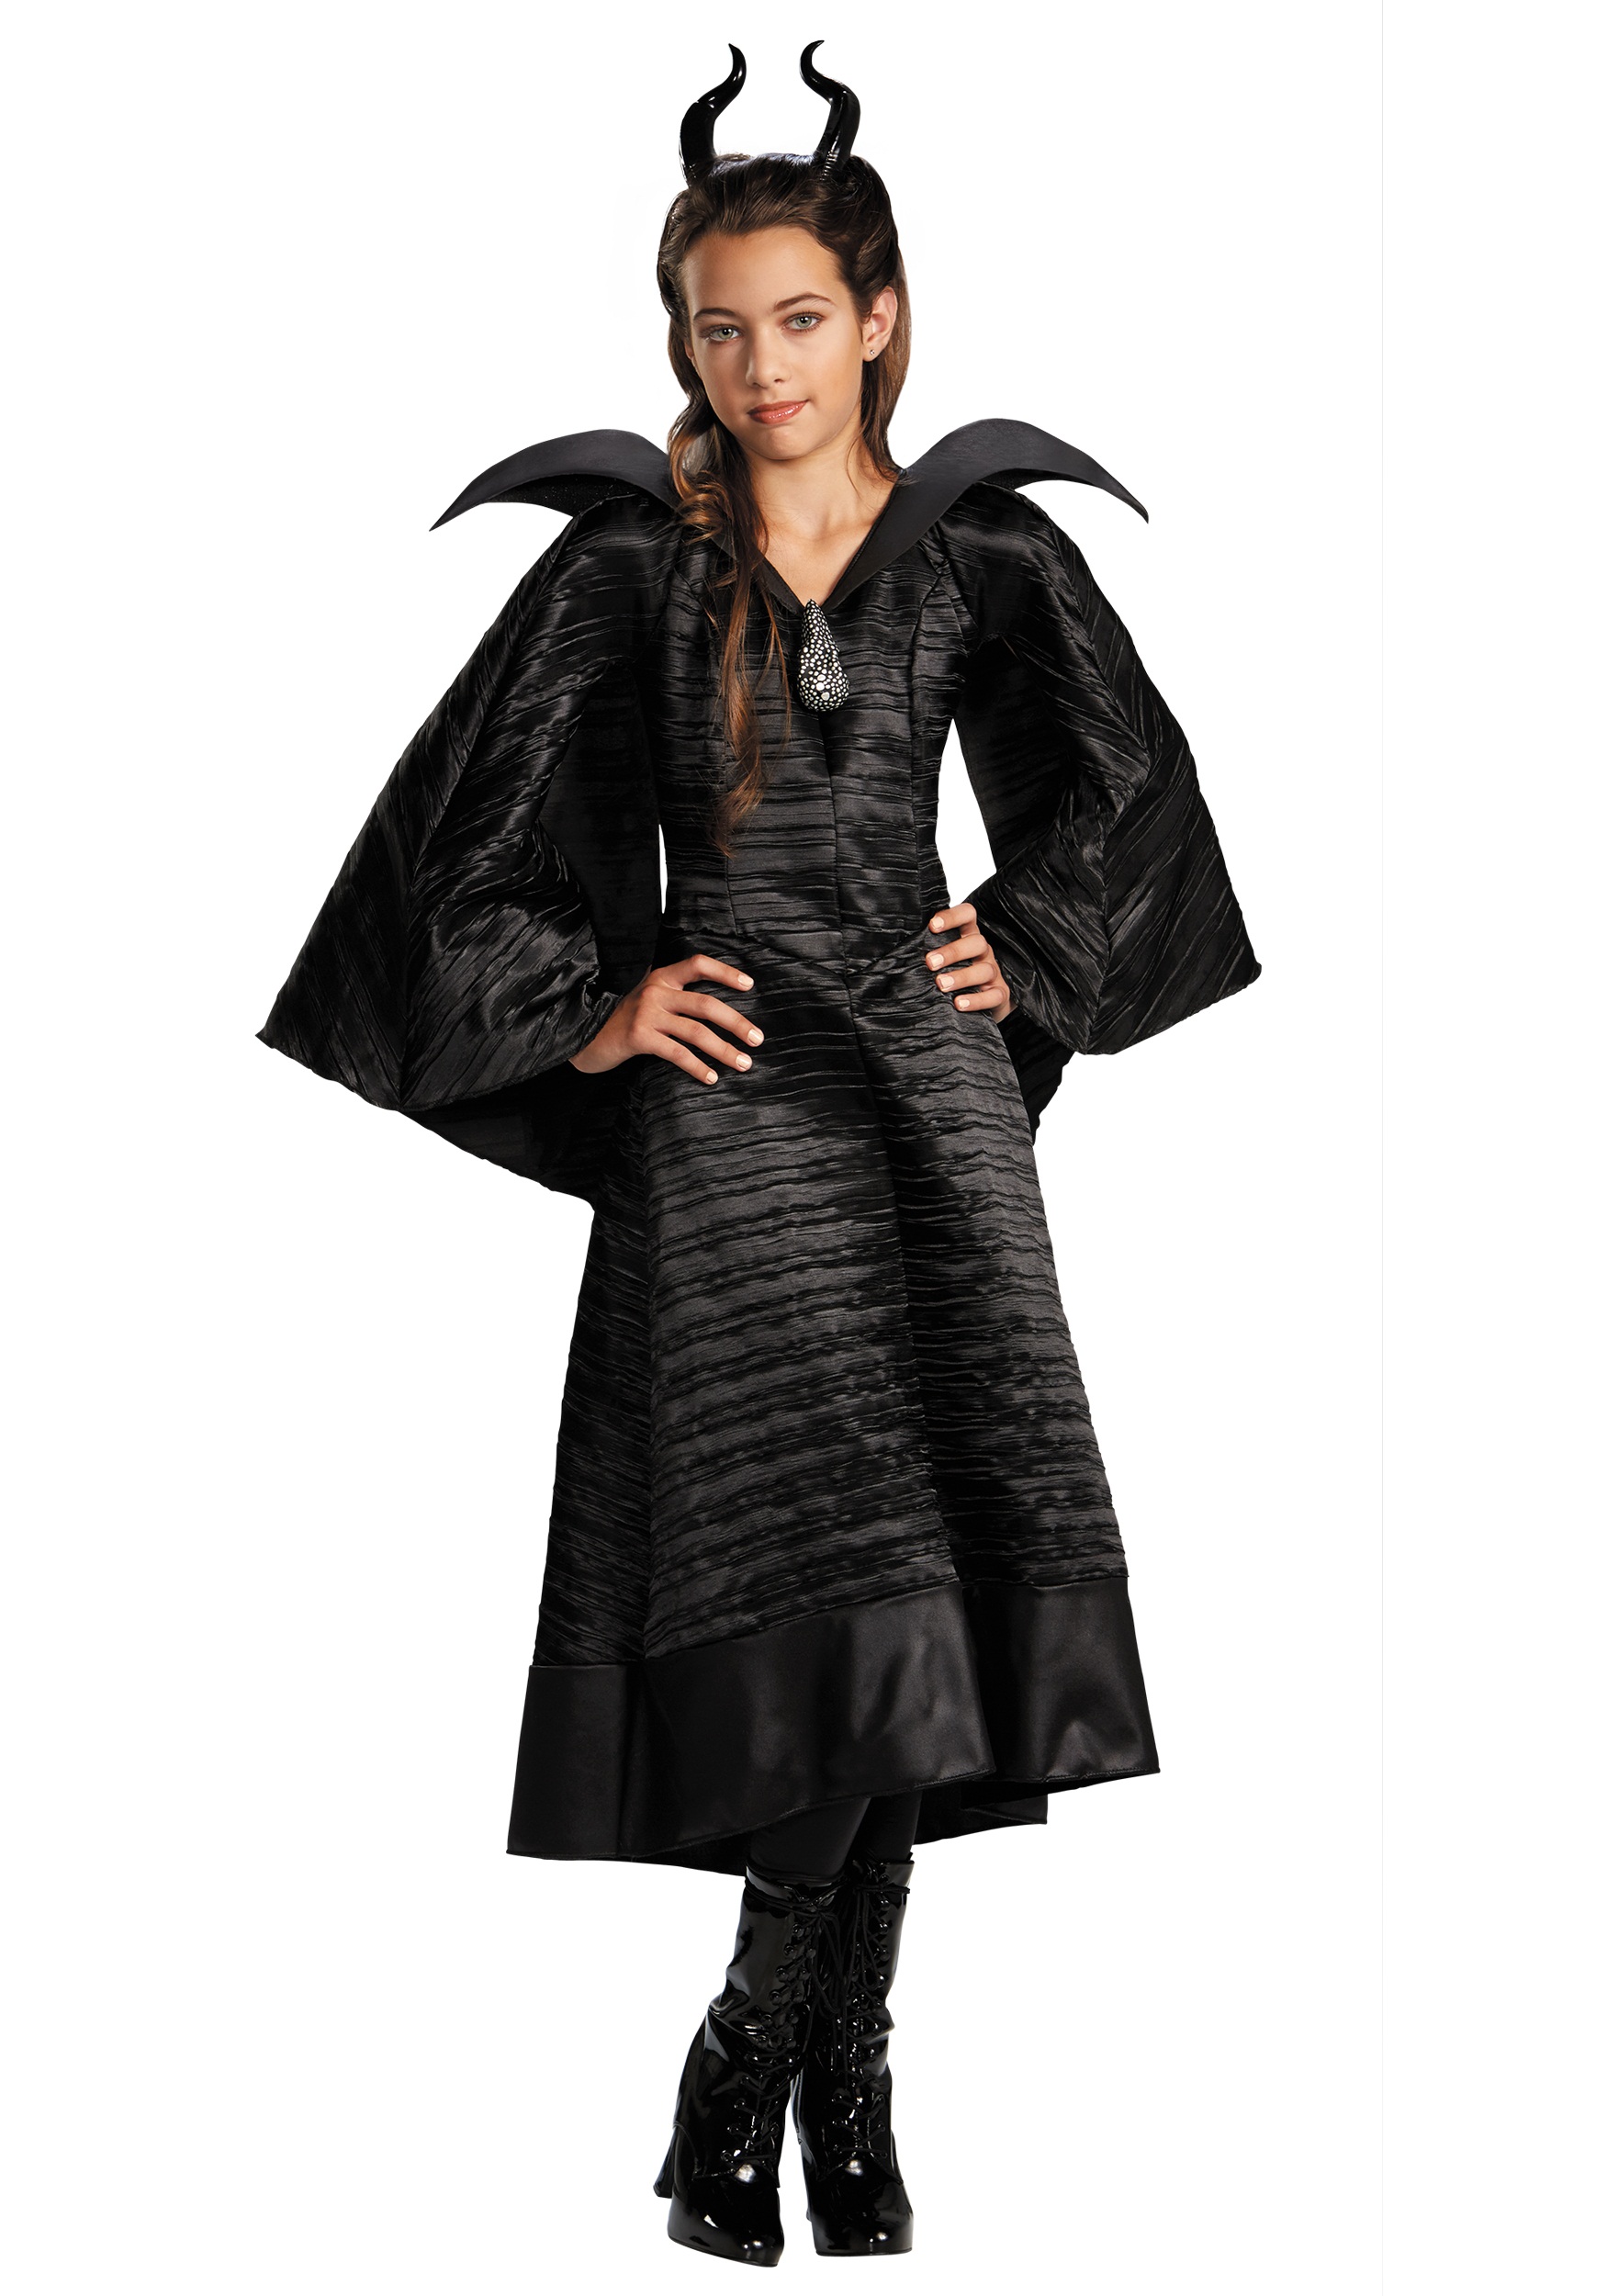 GIRLS DELUXE BLACK MALEFICENT CHRISTENING GOWN COSTUME includes Dress Brooch Horn Headband